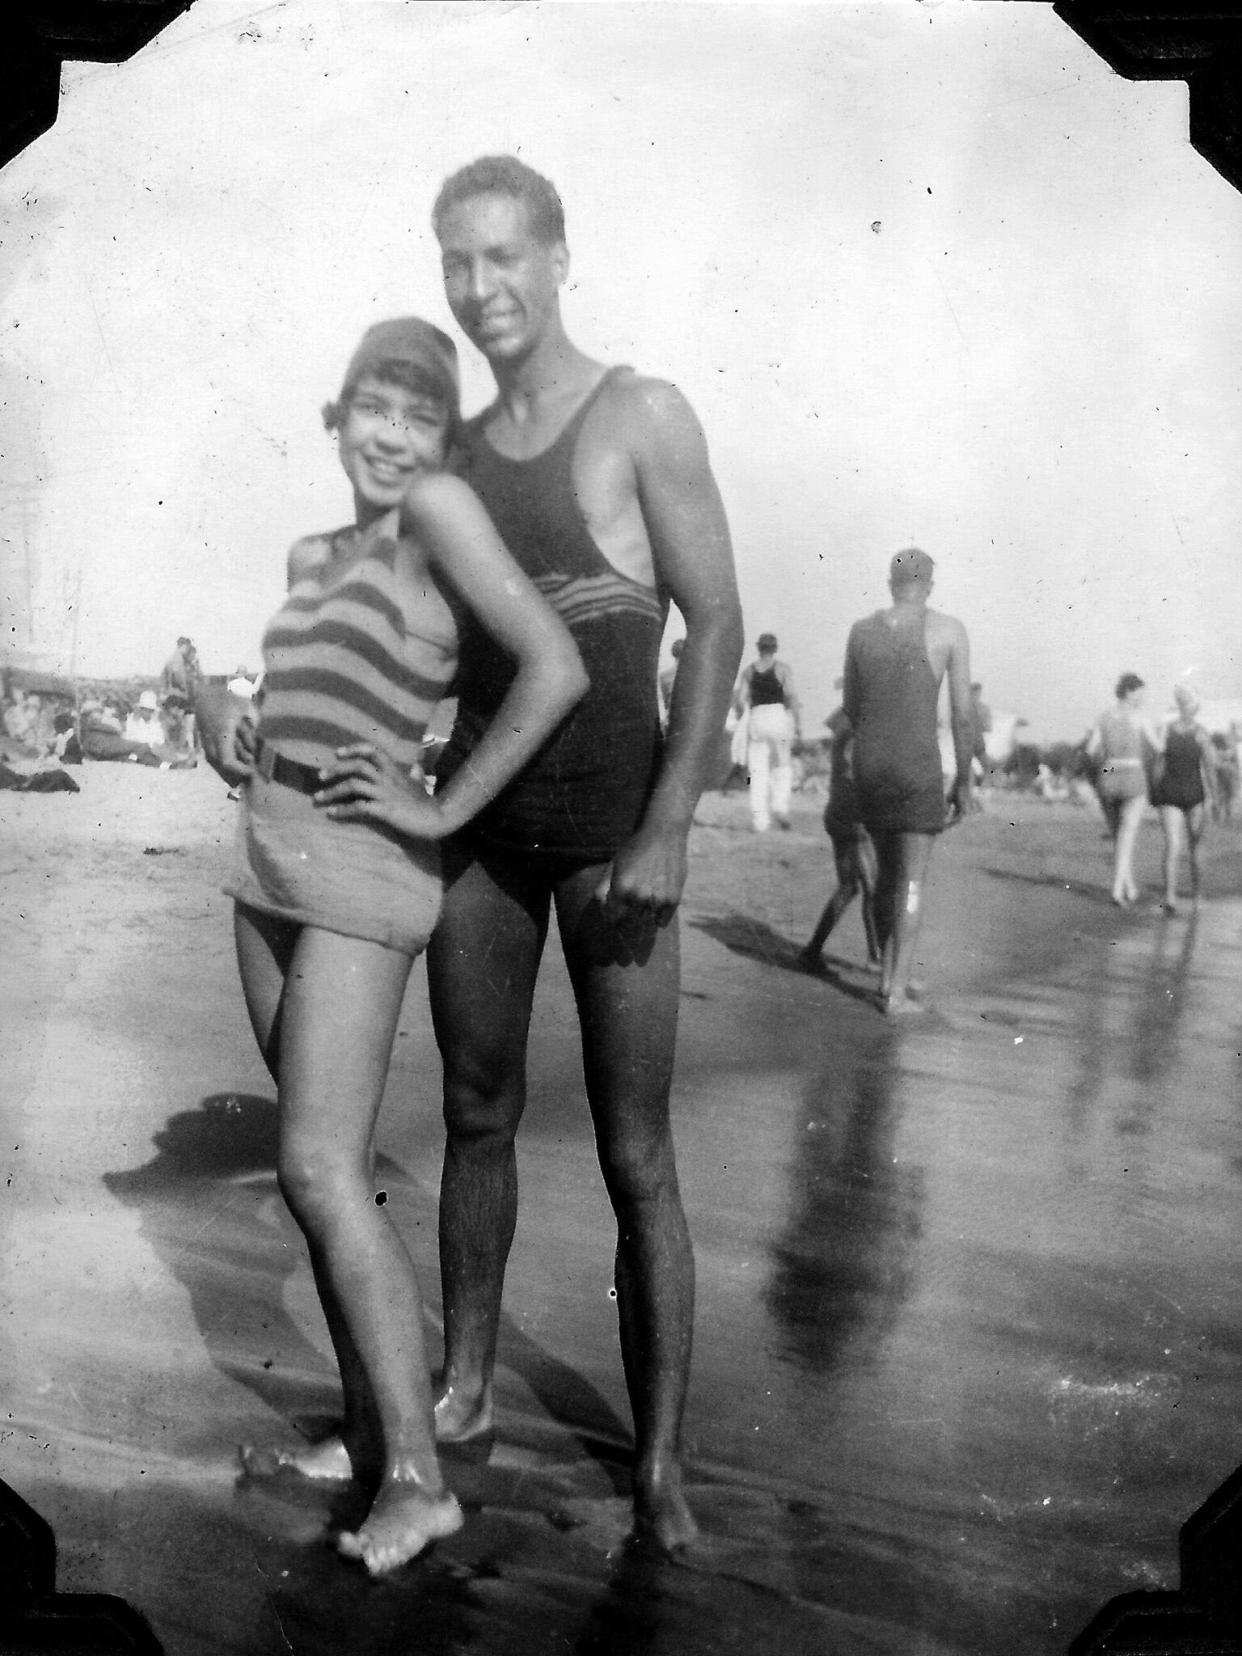 Margie Johnson and John Pettigrew in Manhattan Beach in 1927, before Bruce's Beach, the first Black-owned resort on the West Coast, was taken from its owners.